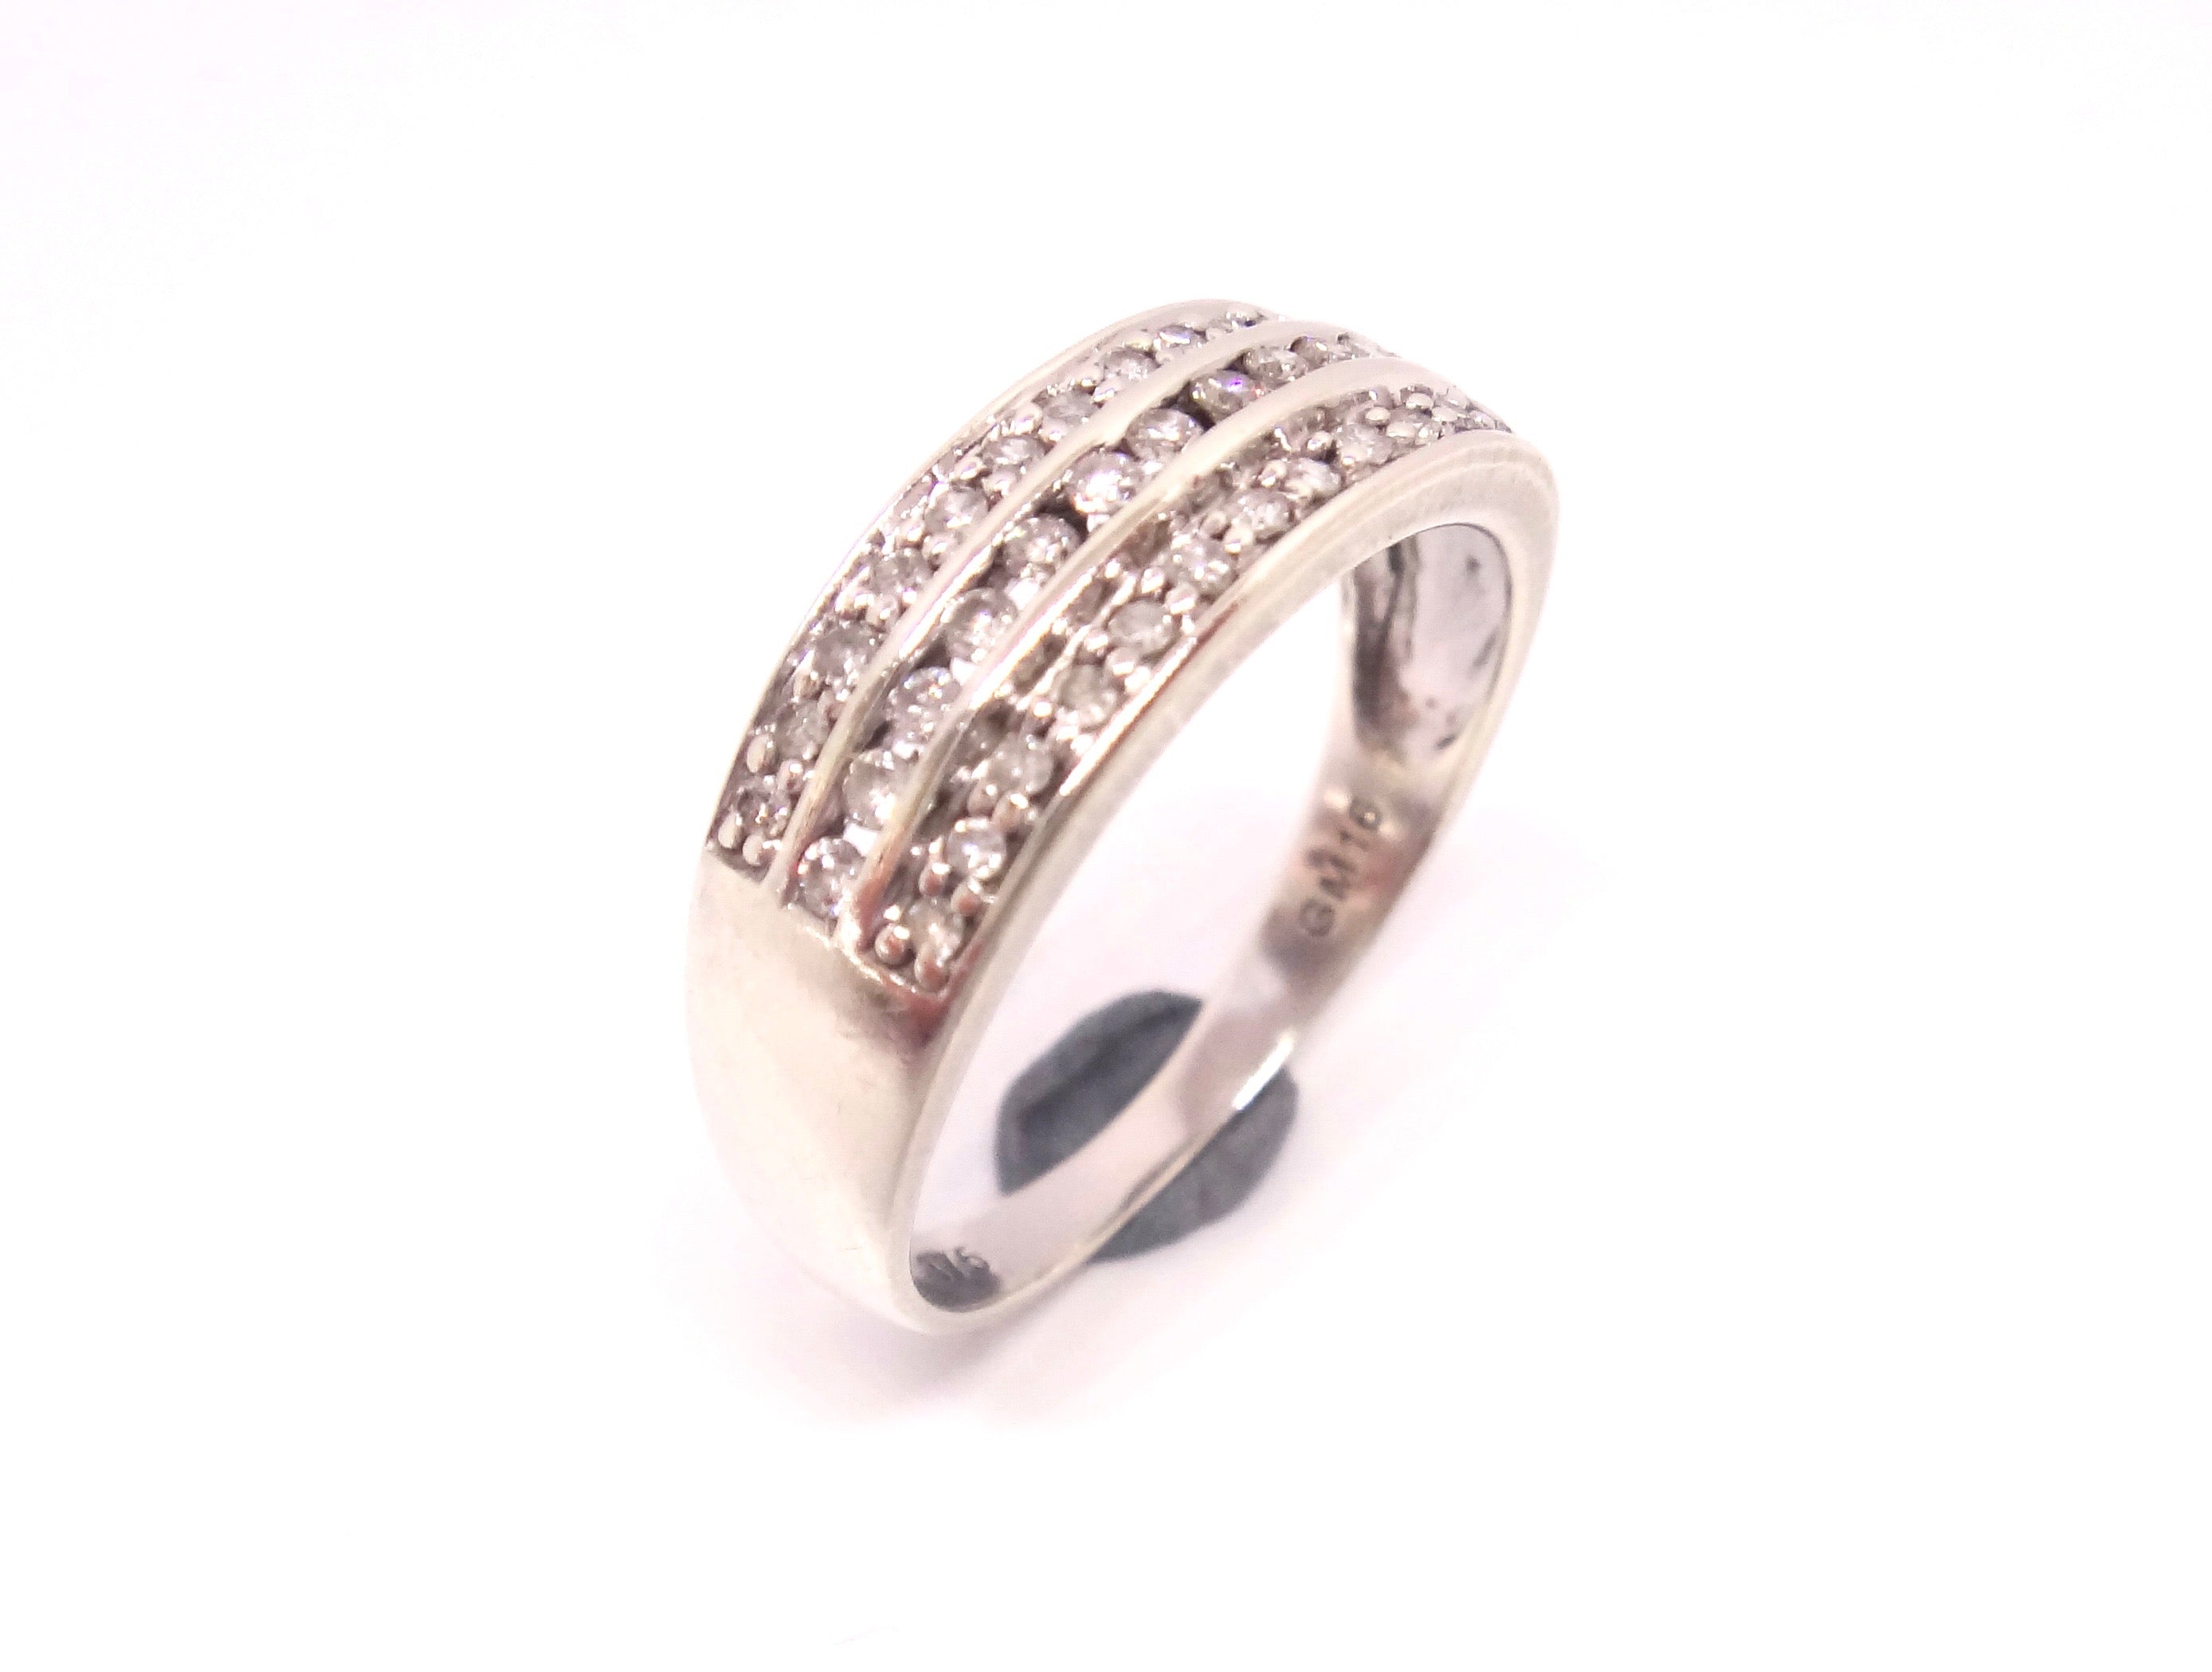 9CT White GOLD & Multi DIAMOND Channel Set Band Ring